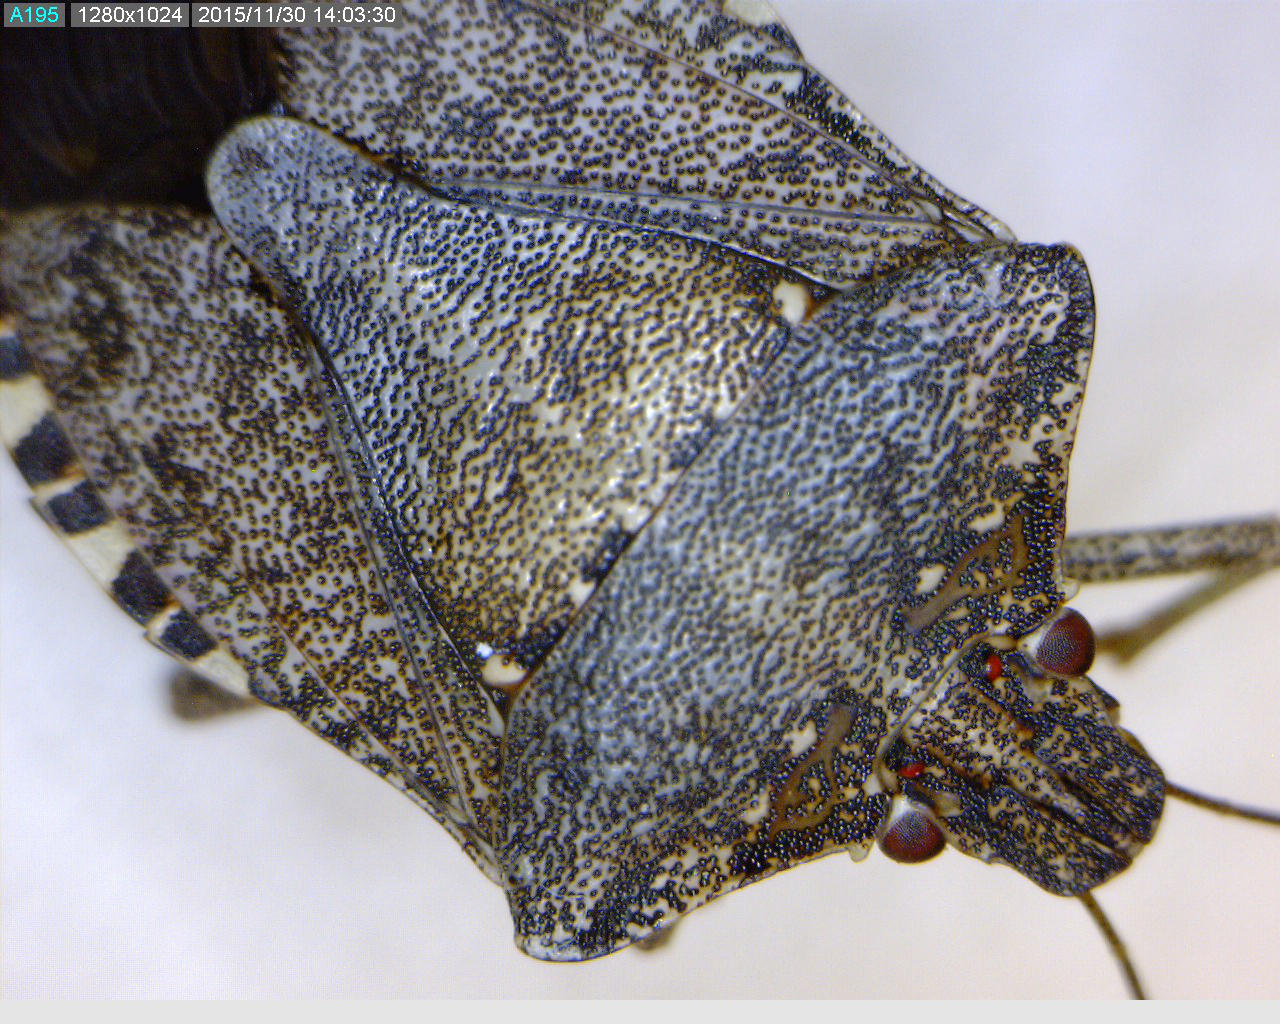 Three or four key characteristics are used to distinguish the brown marmorated stink bug (BMSB) from other stink bugs found in the Pacific Northwest: 1) white bands on the brown antennae, 2) bands on the dorsal (top) side of the peripheral margin of the abdomen, 3) smooth leading edge of the prothorax (shoulders), 4) gem-encrusted prothorax just behind the head (on both the dorsal and ventral side).